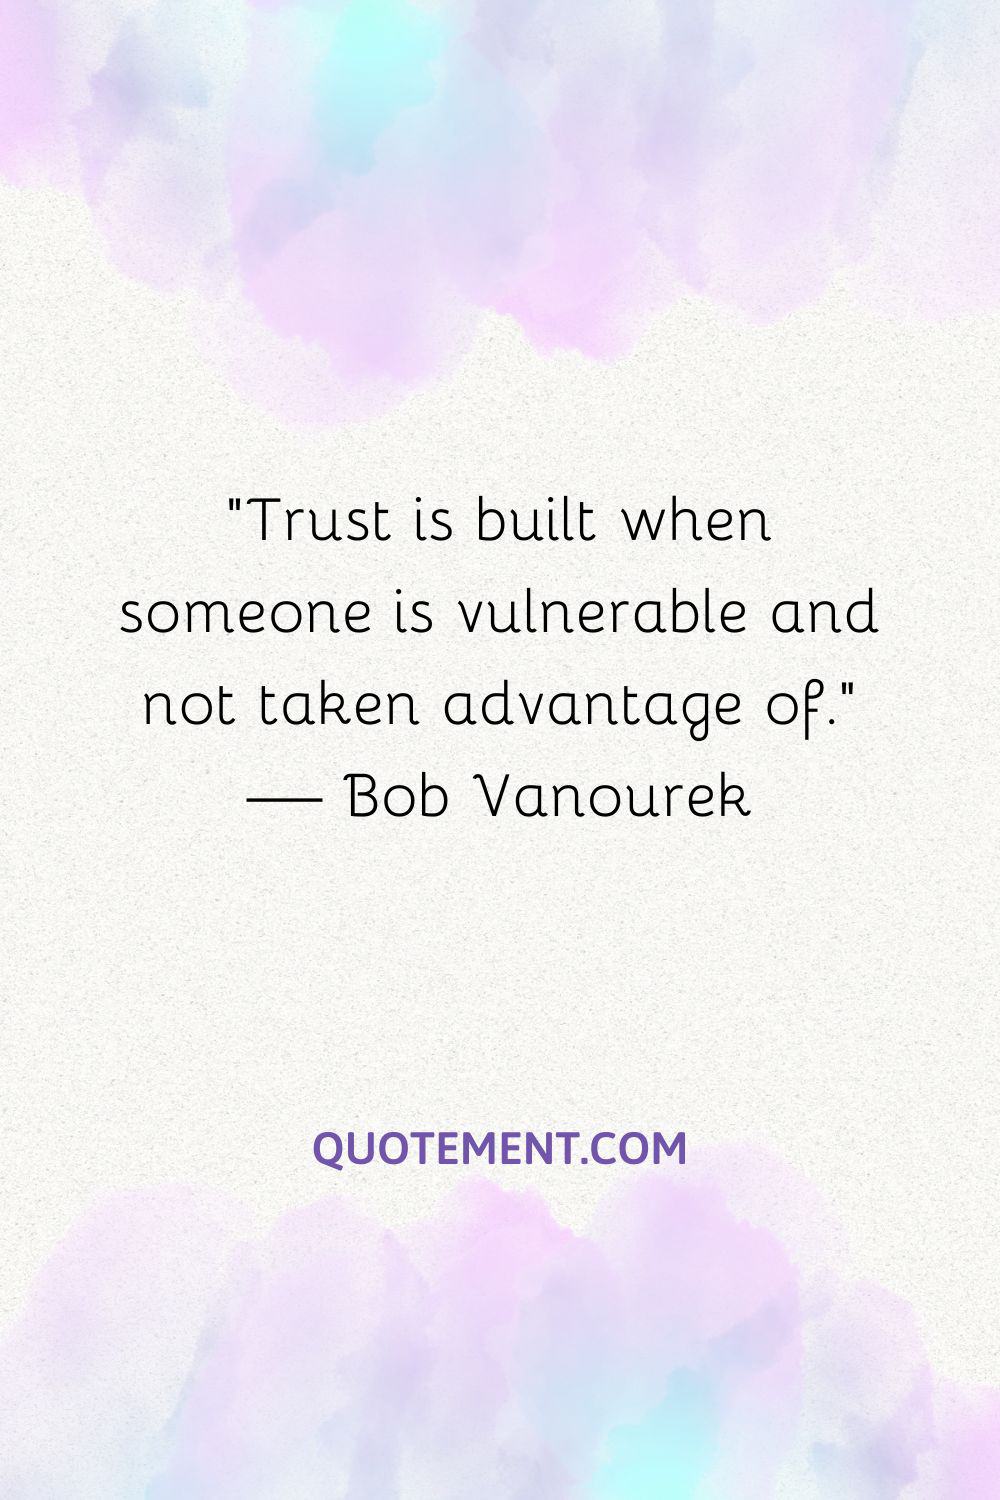 Trust is built when someone is vulnerable and not taken advantage of